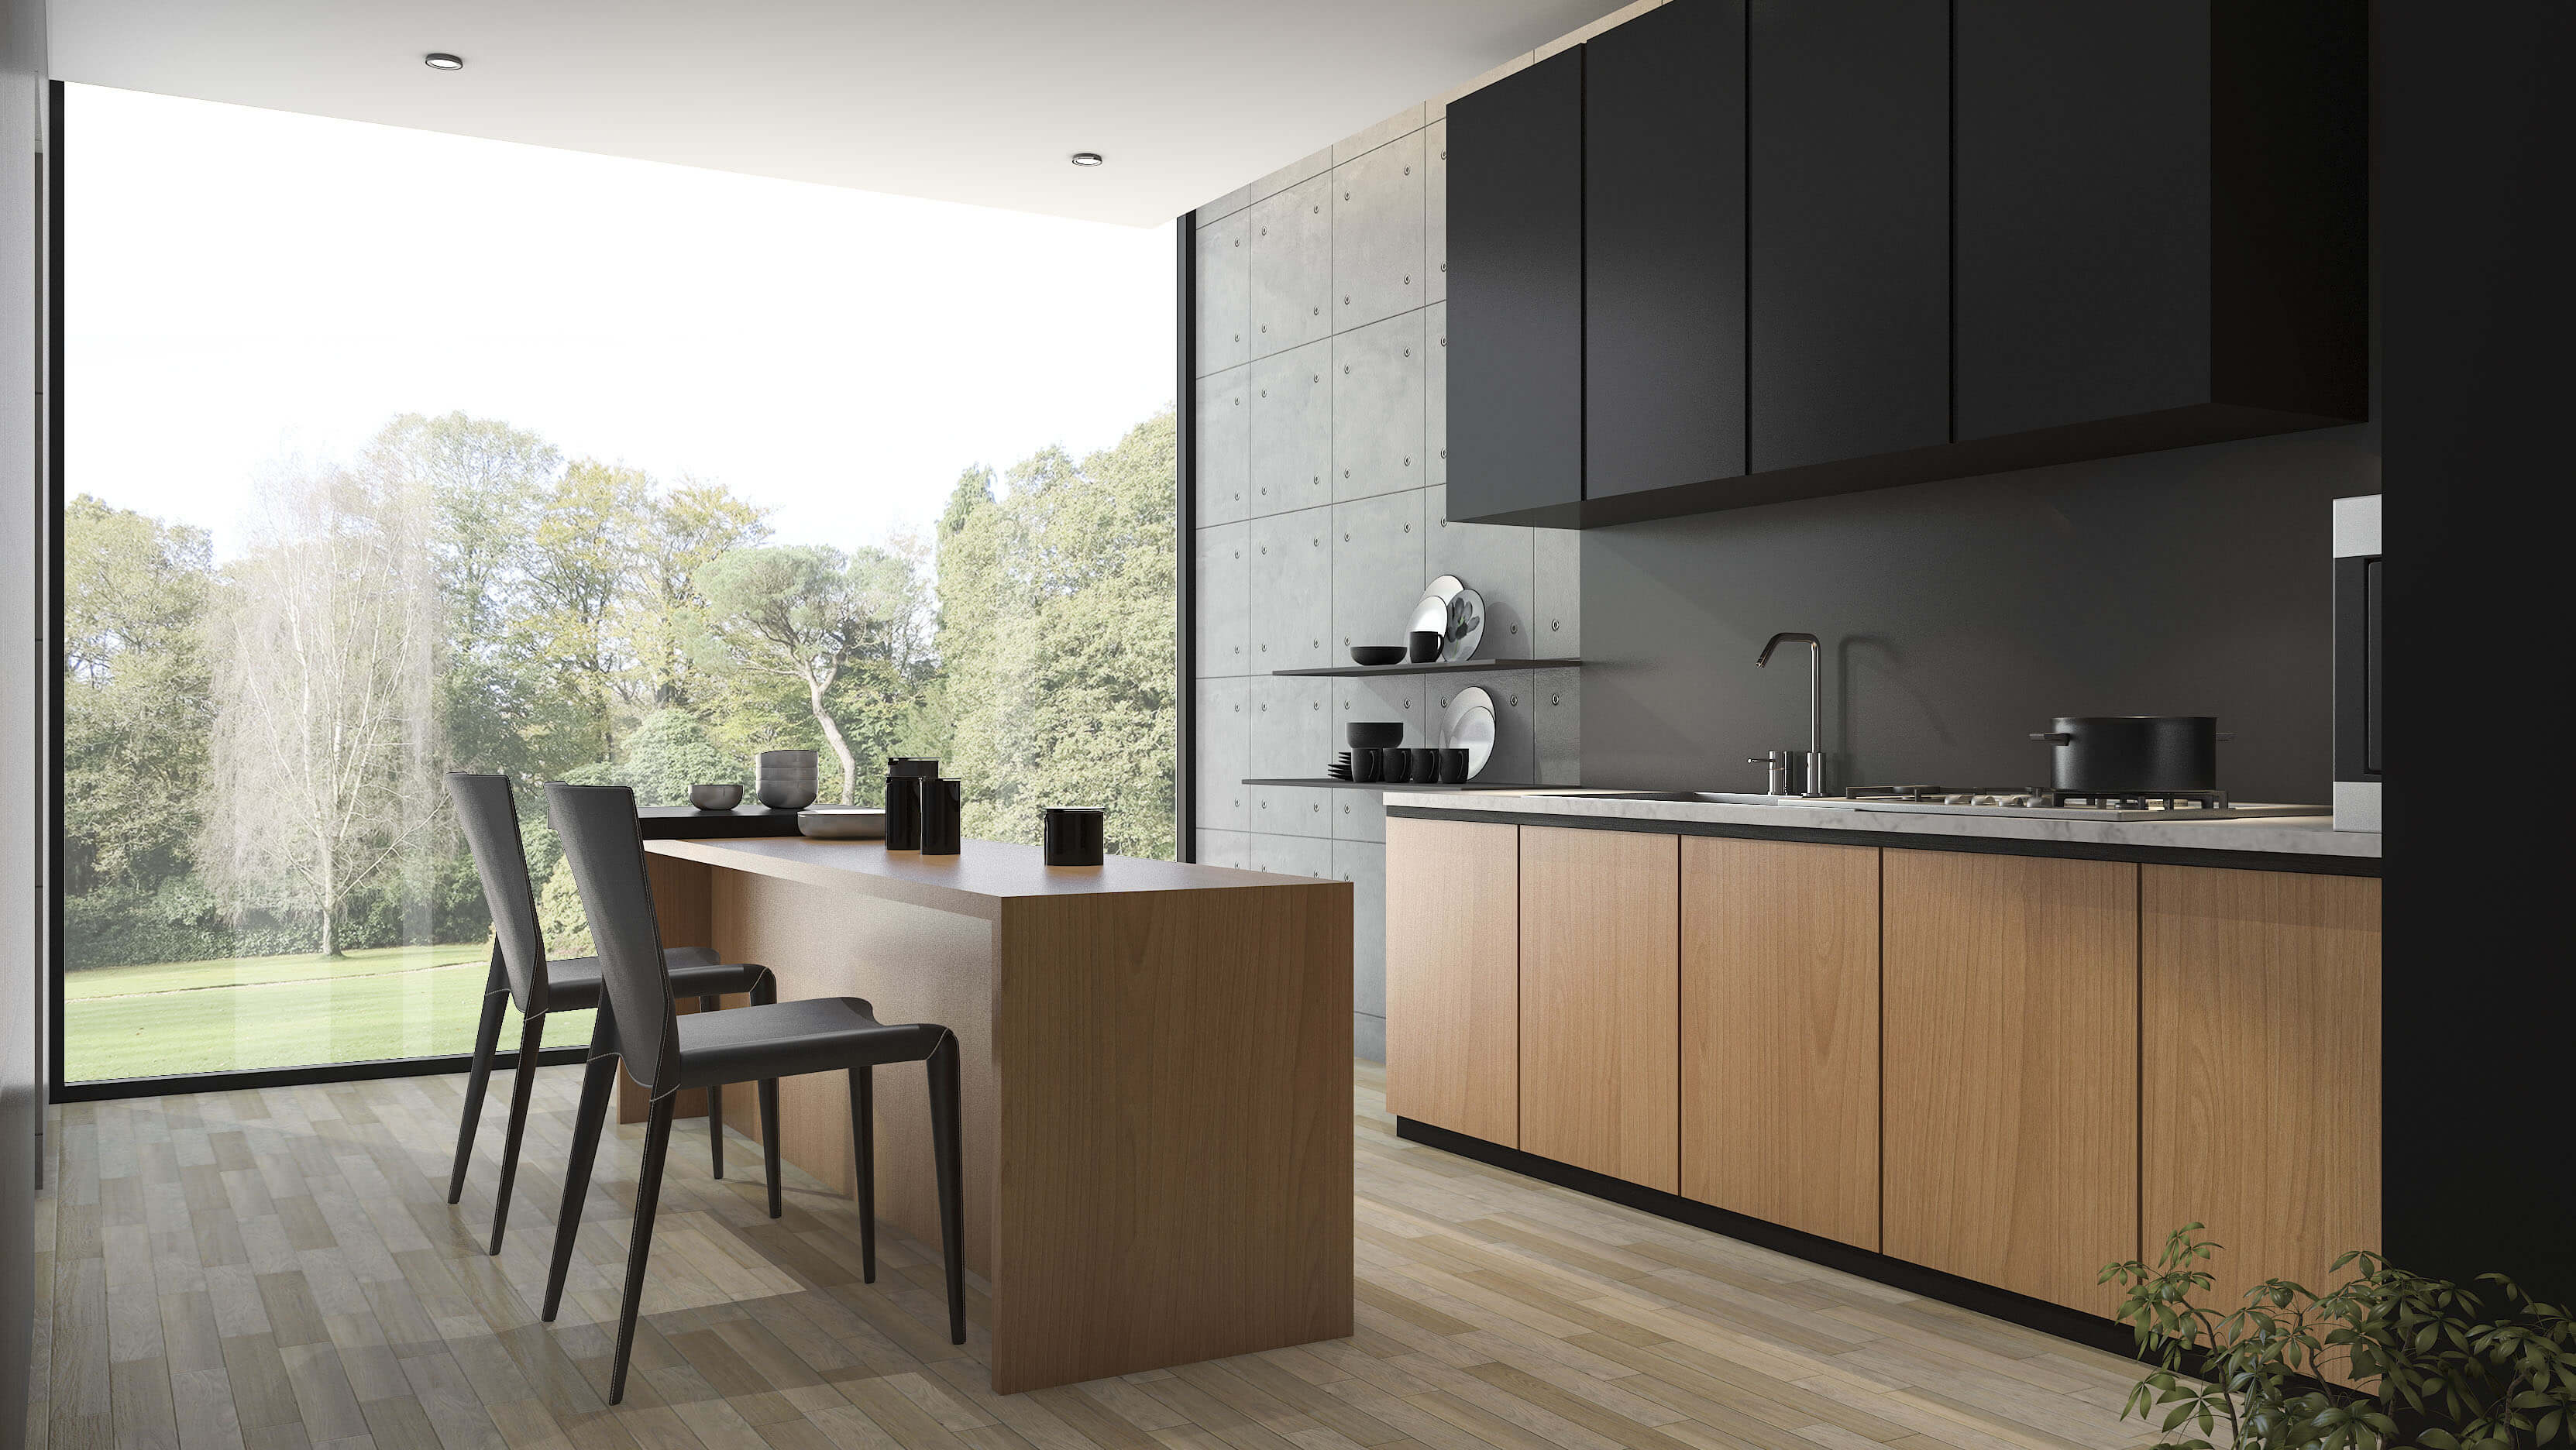 Modern minimalist kitchen with breakfast bar and floating shelves